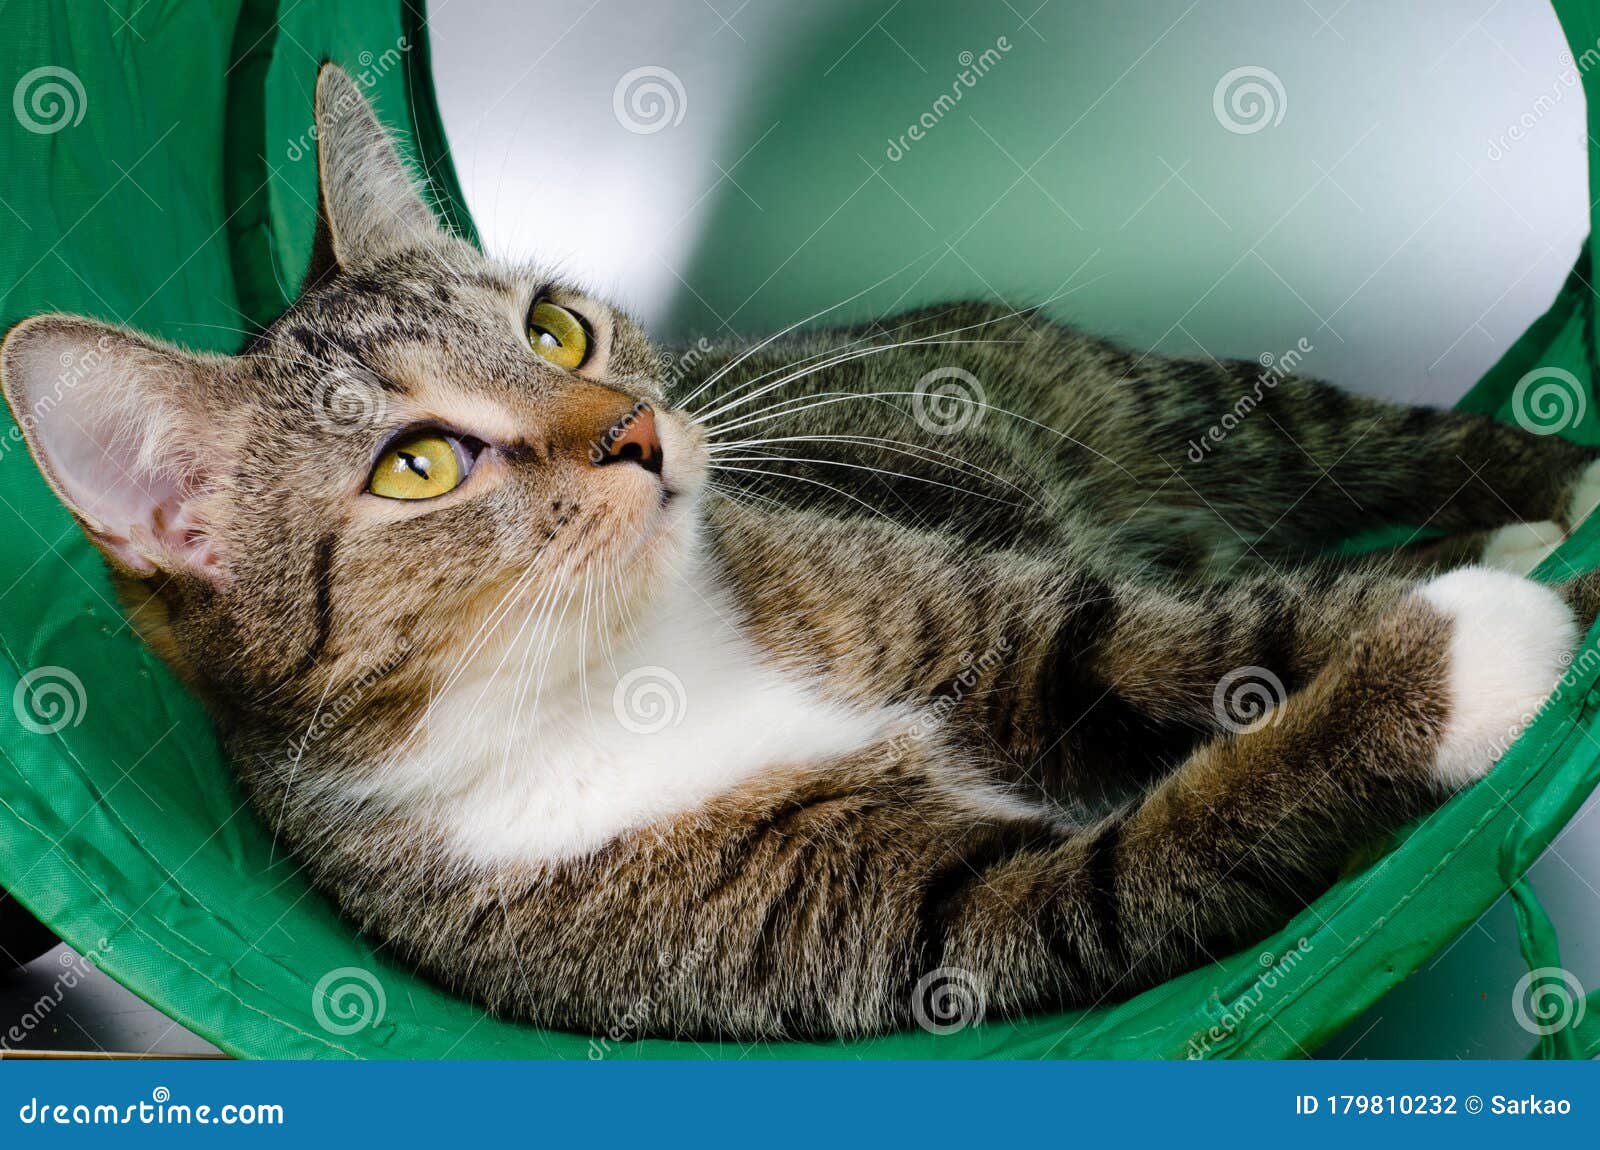 685 Cat Tunnel Photos Free Royalty Free Stock Photos From Dreamstime